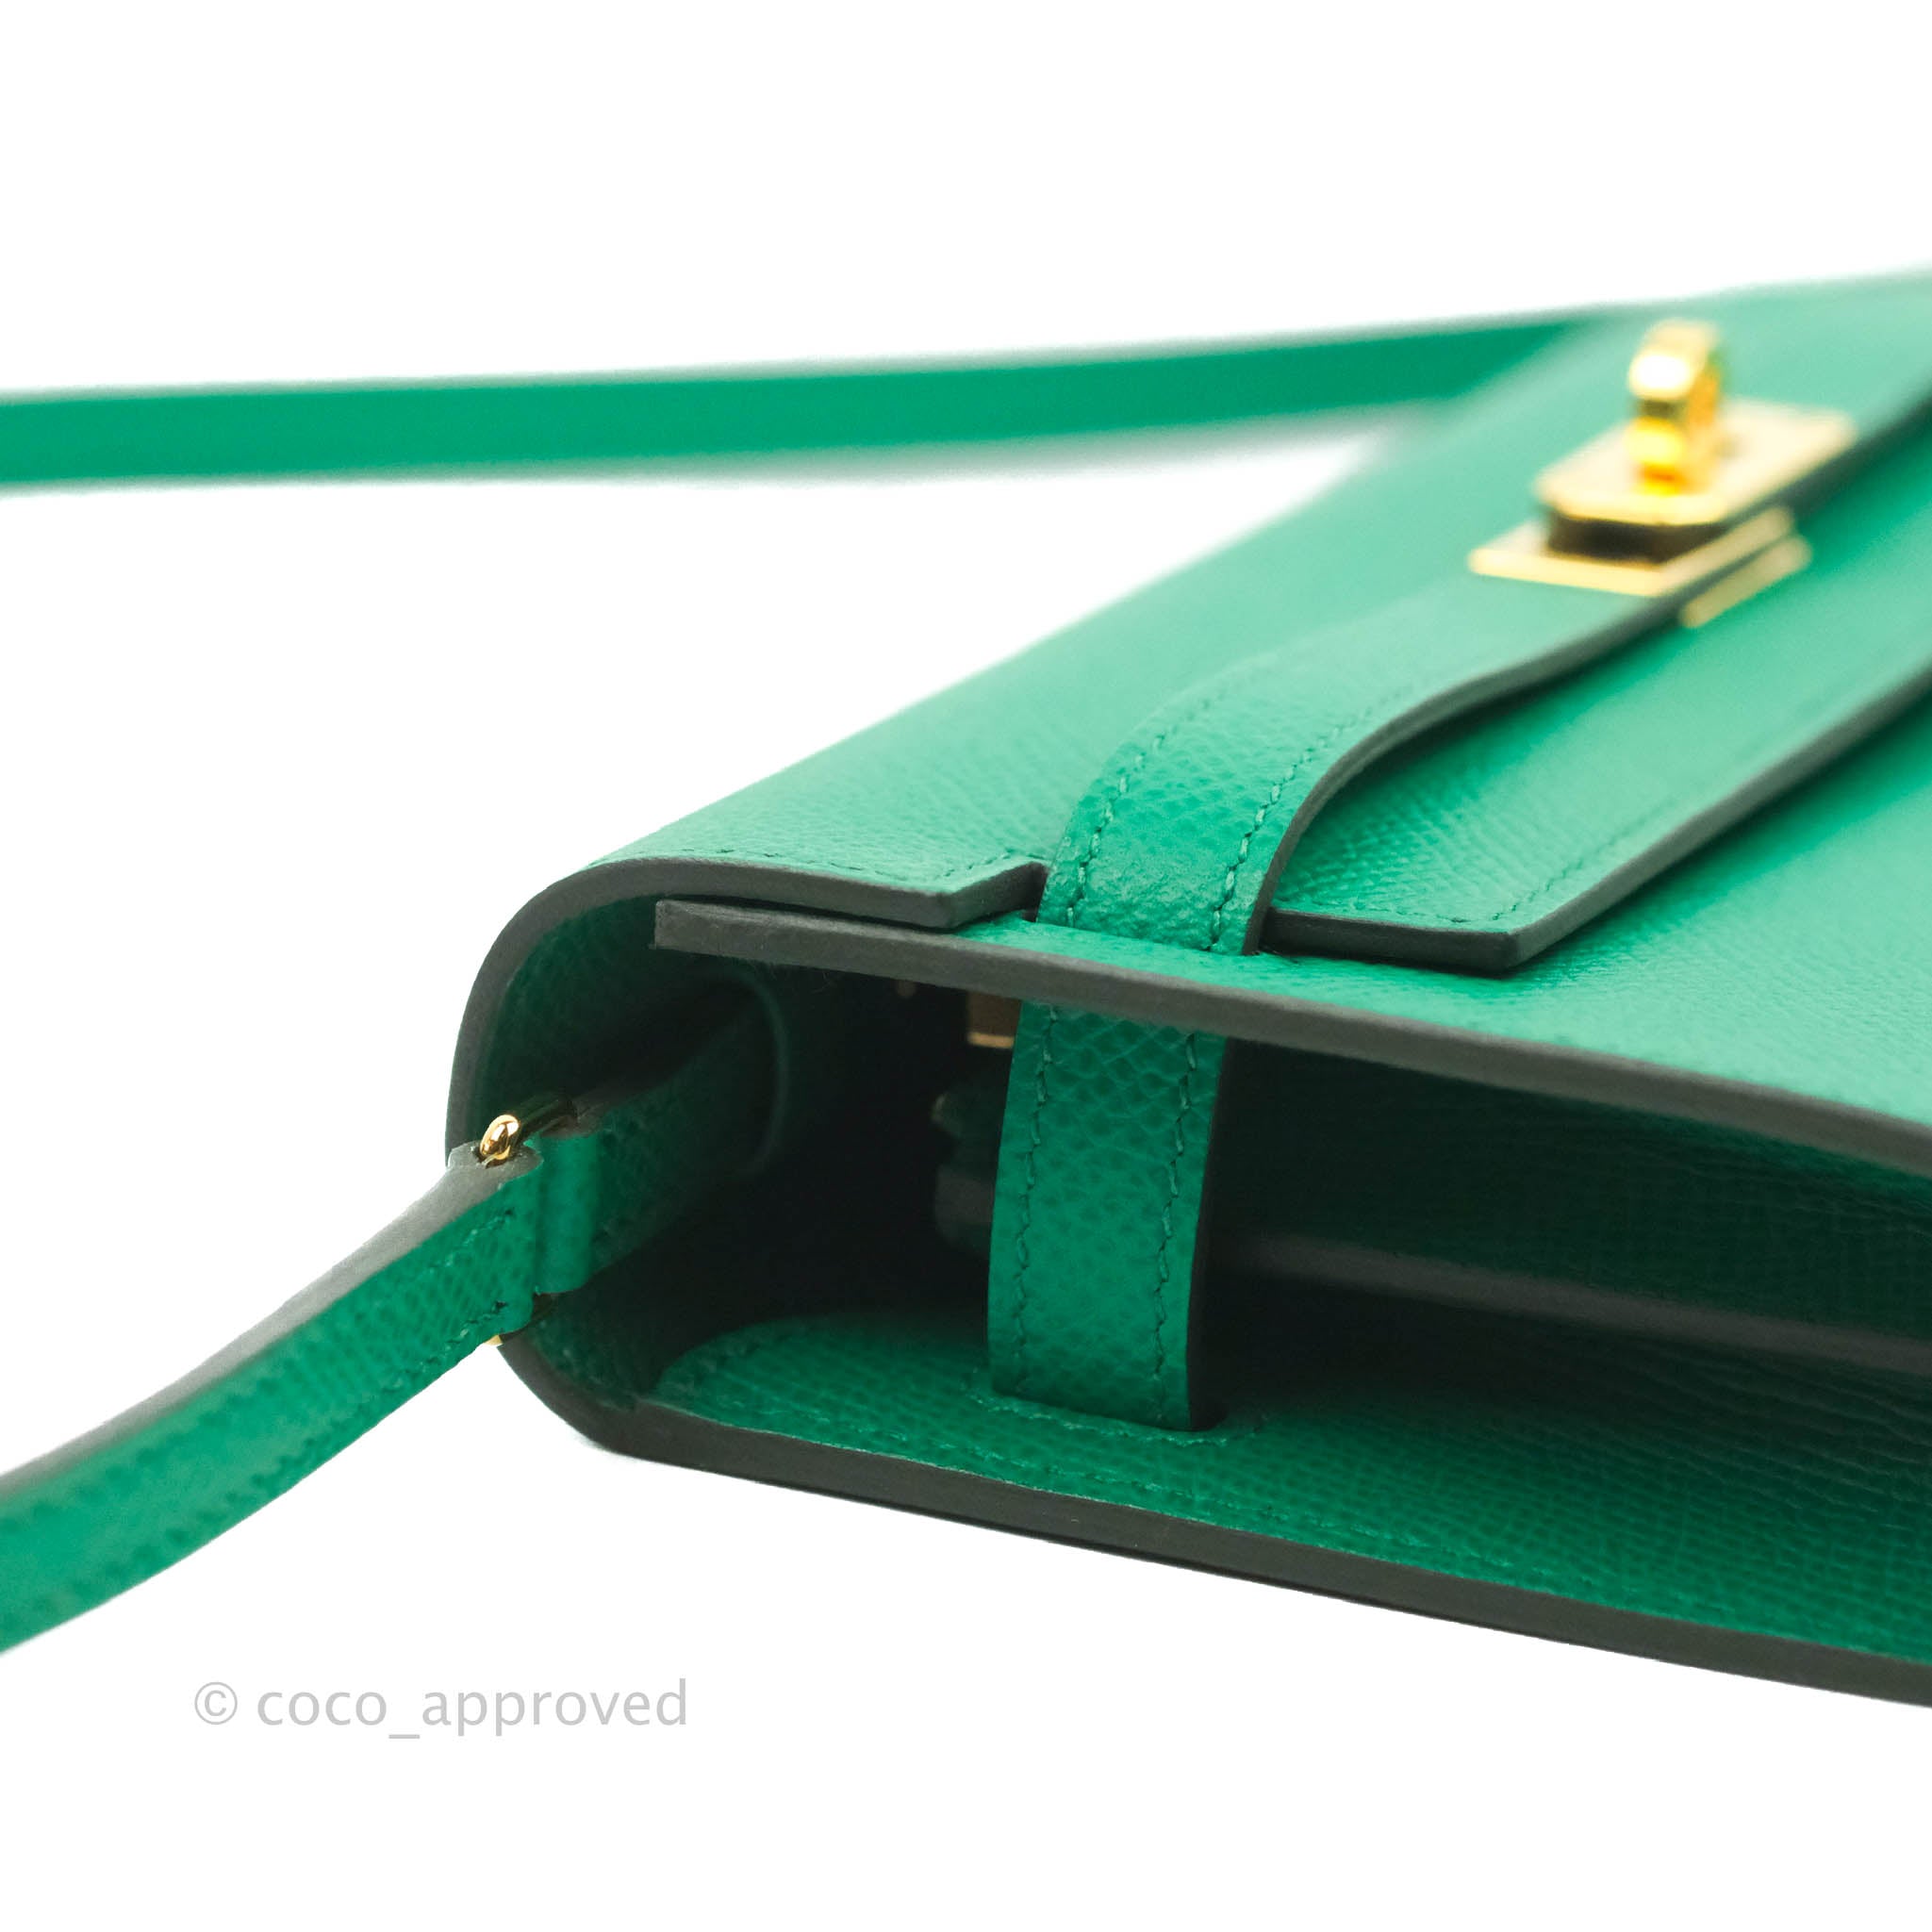 Hermès Kelly To Go Touch Wallet In Vert Jade Epsom And Shiny